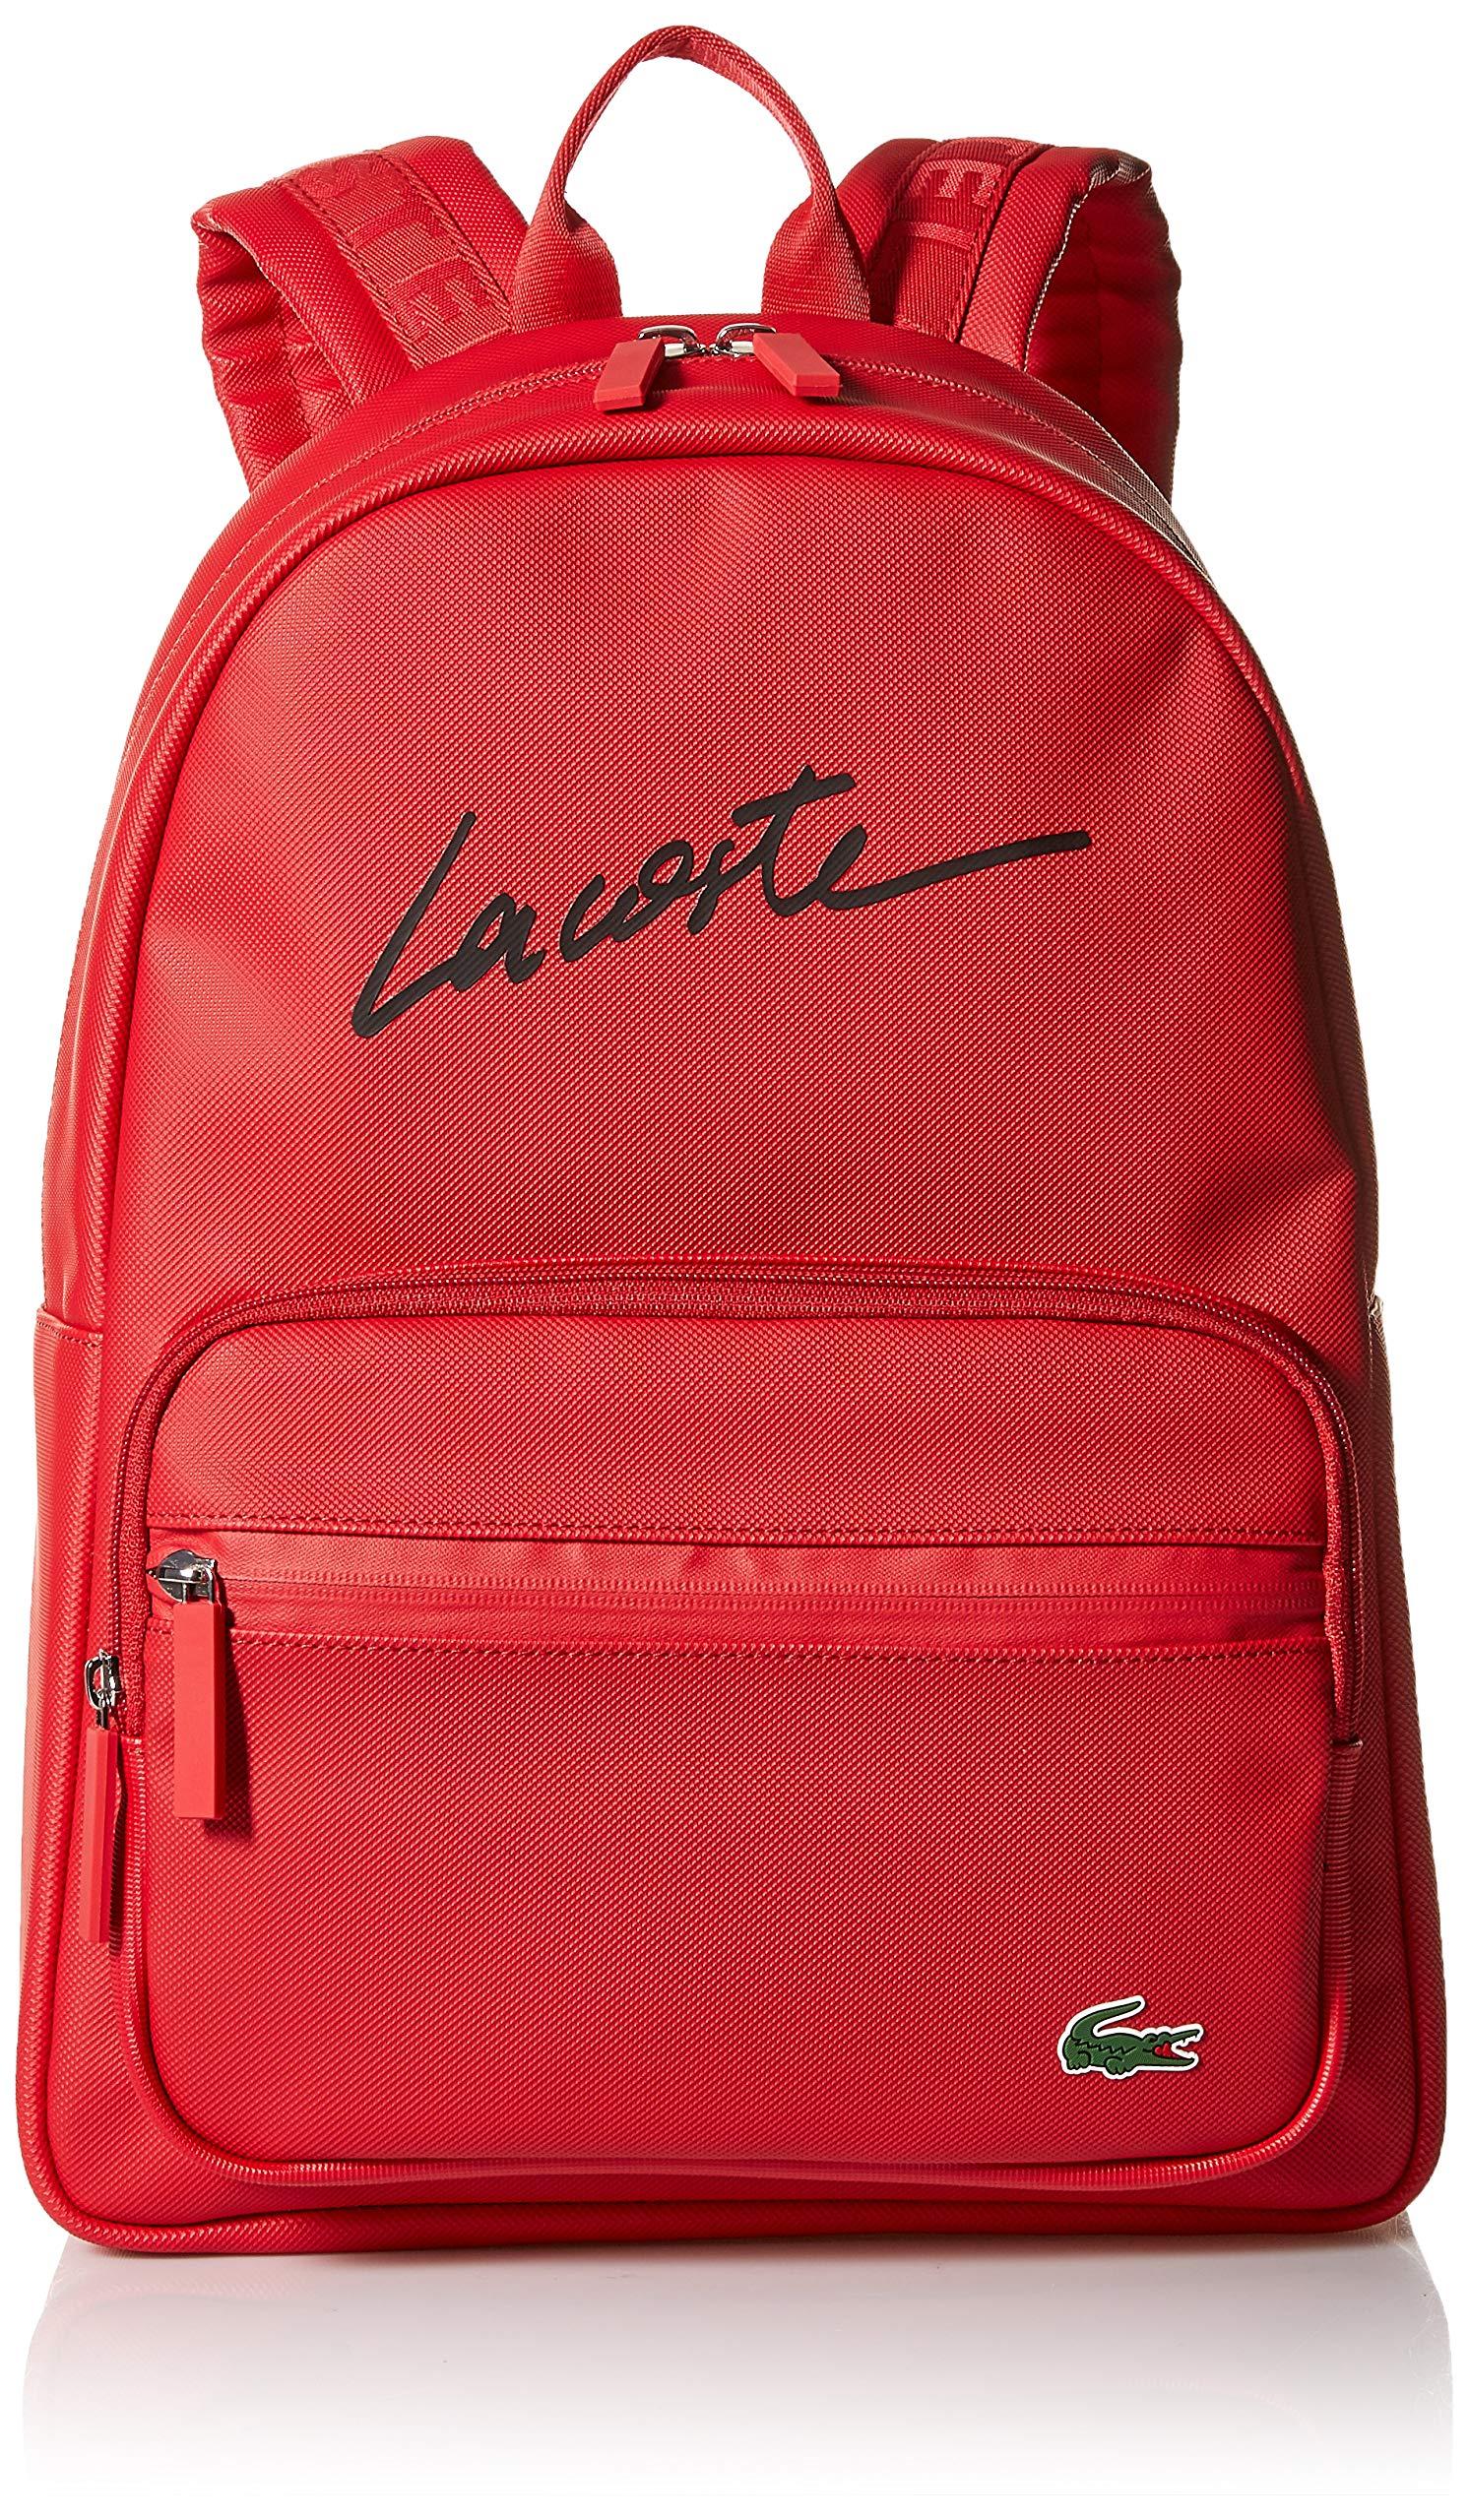 Lacoste L1212 Concept Lettering Backpack in Red for Men - Lyst